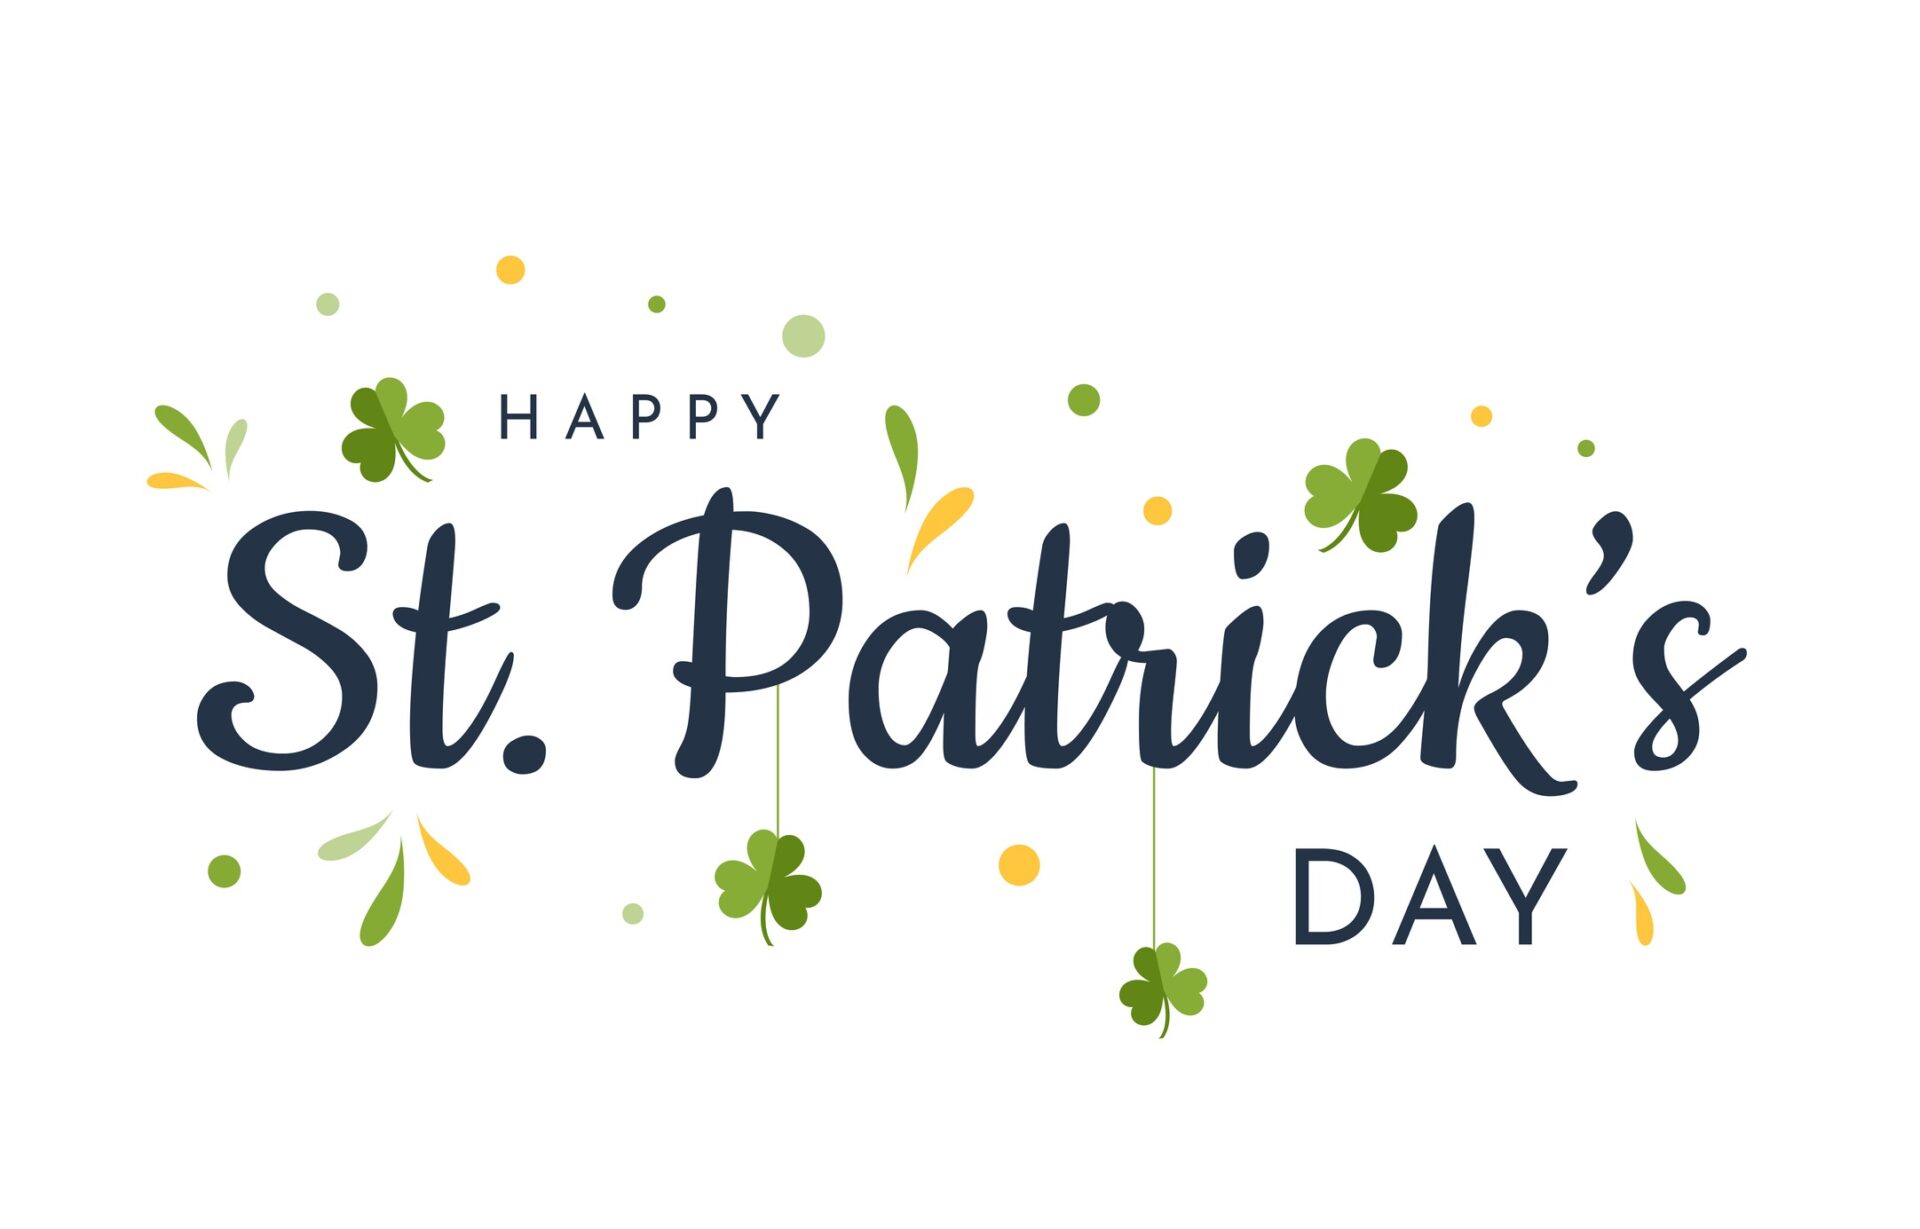 Saint Patrick's Day card, background. Vector